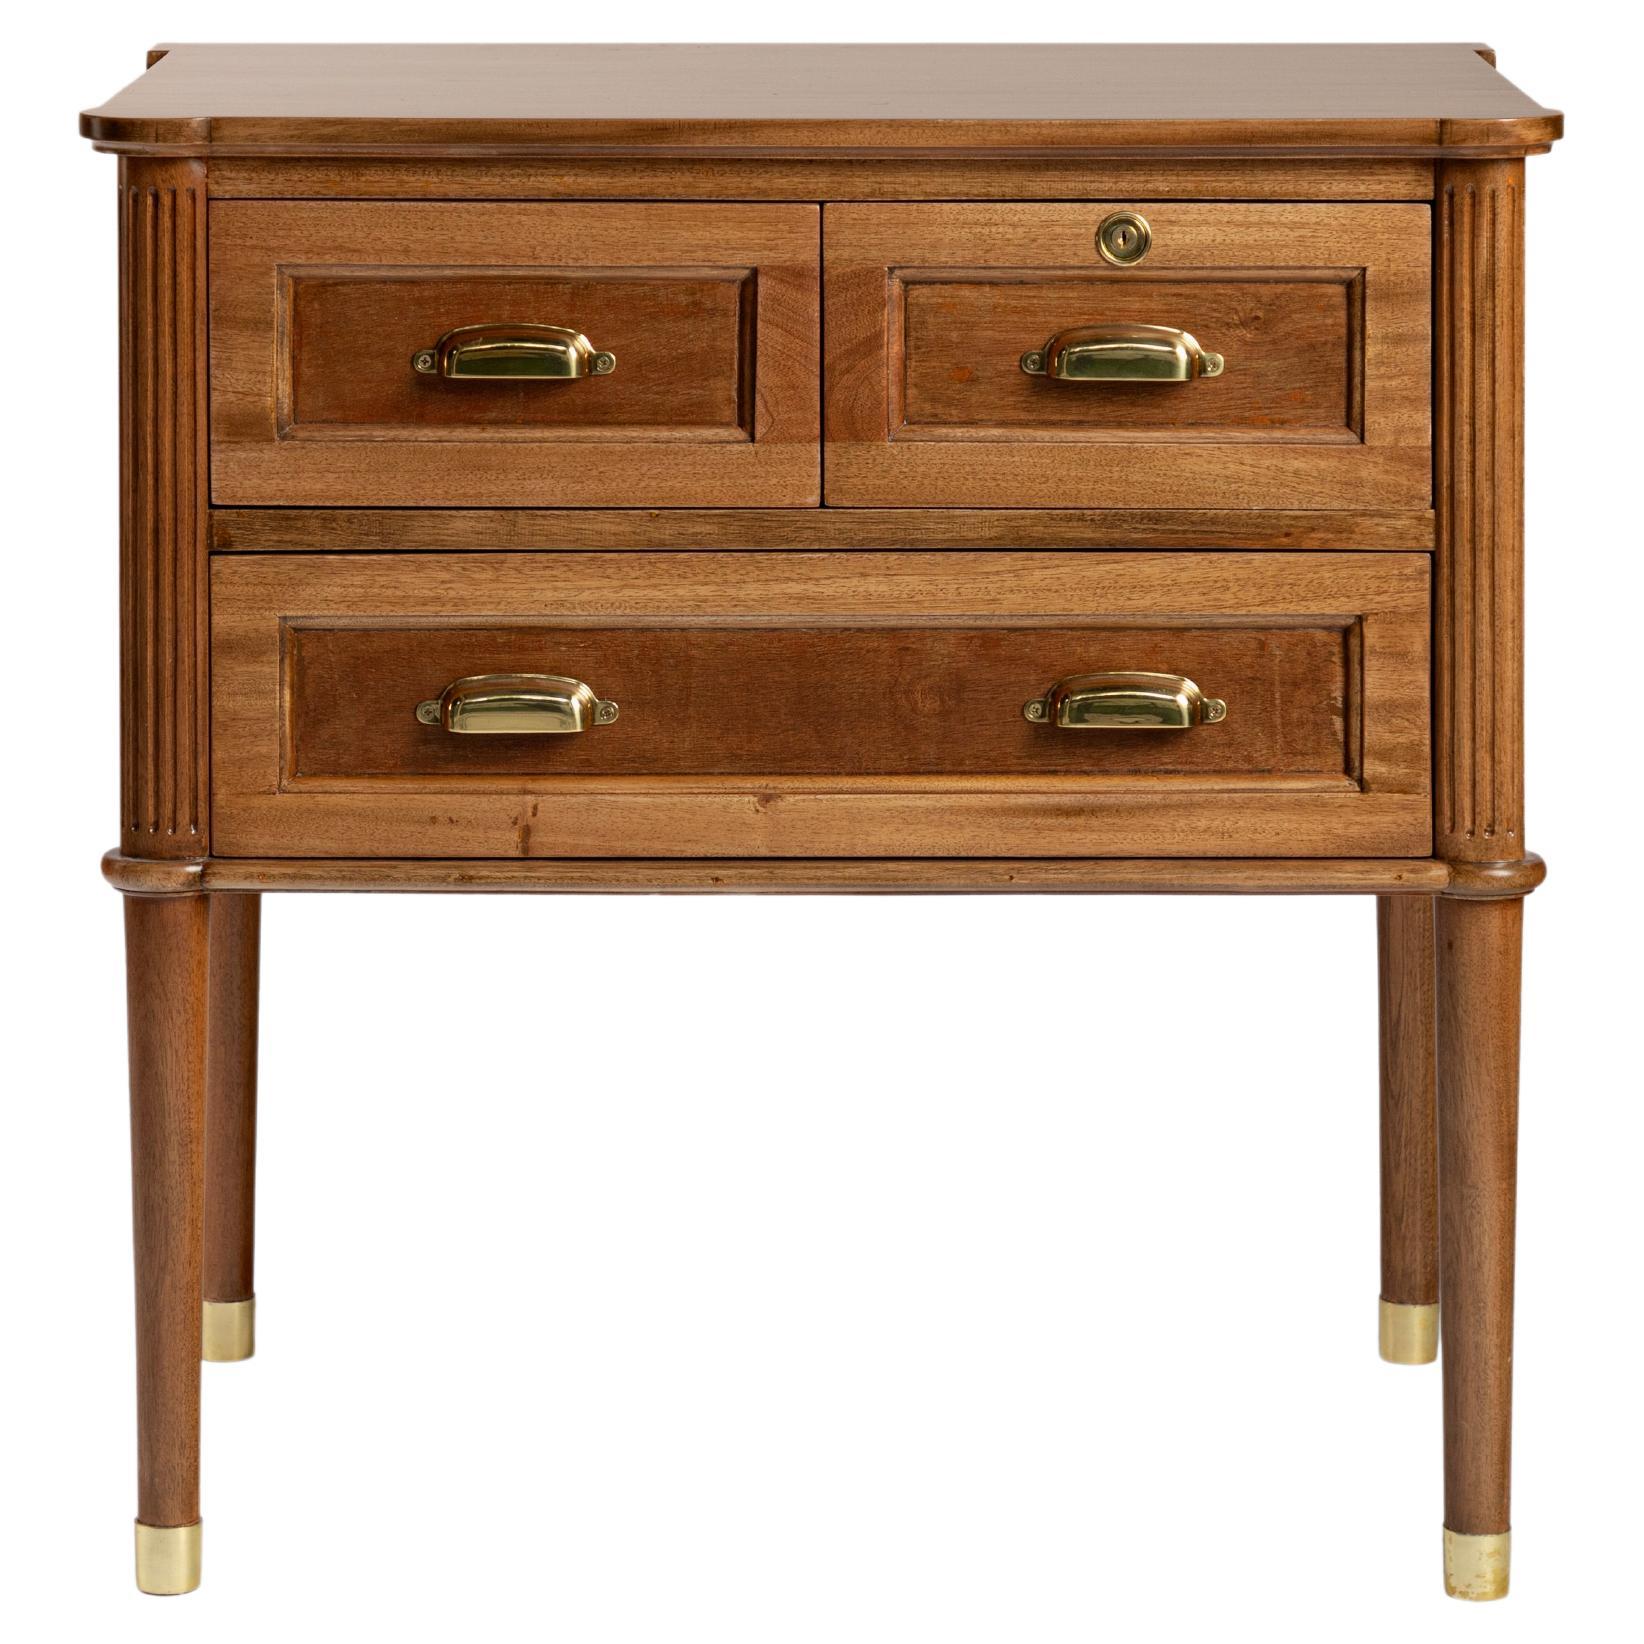 Wooden nightstand with brass handles and leg caps For Sale